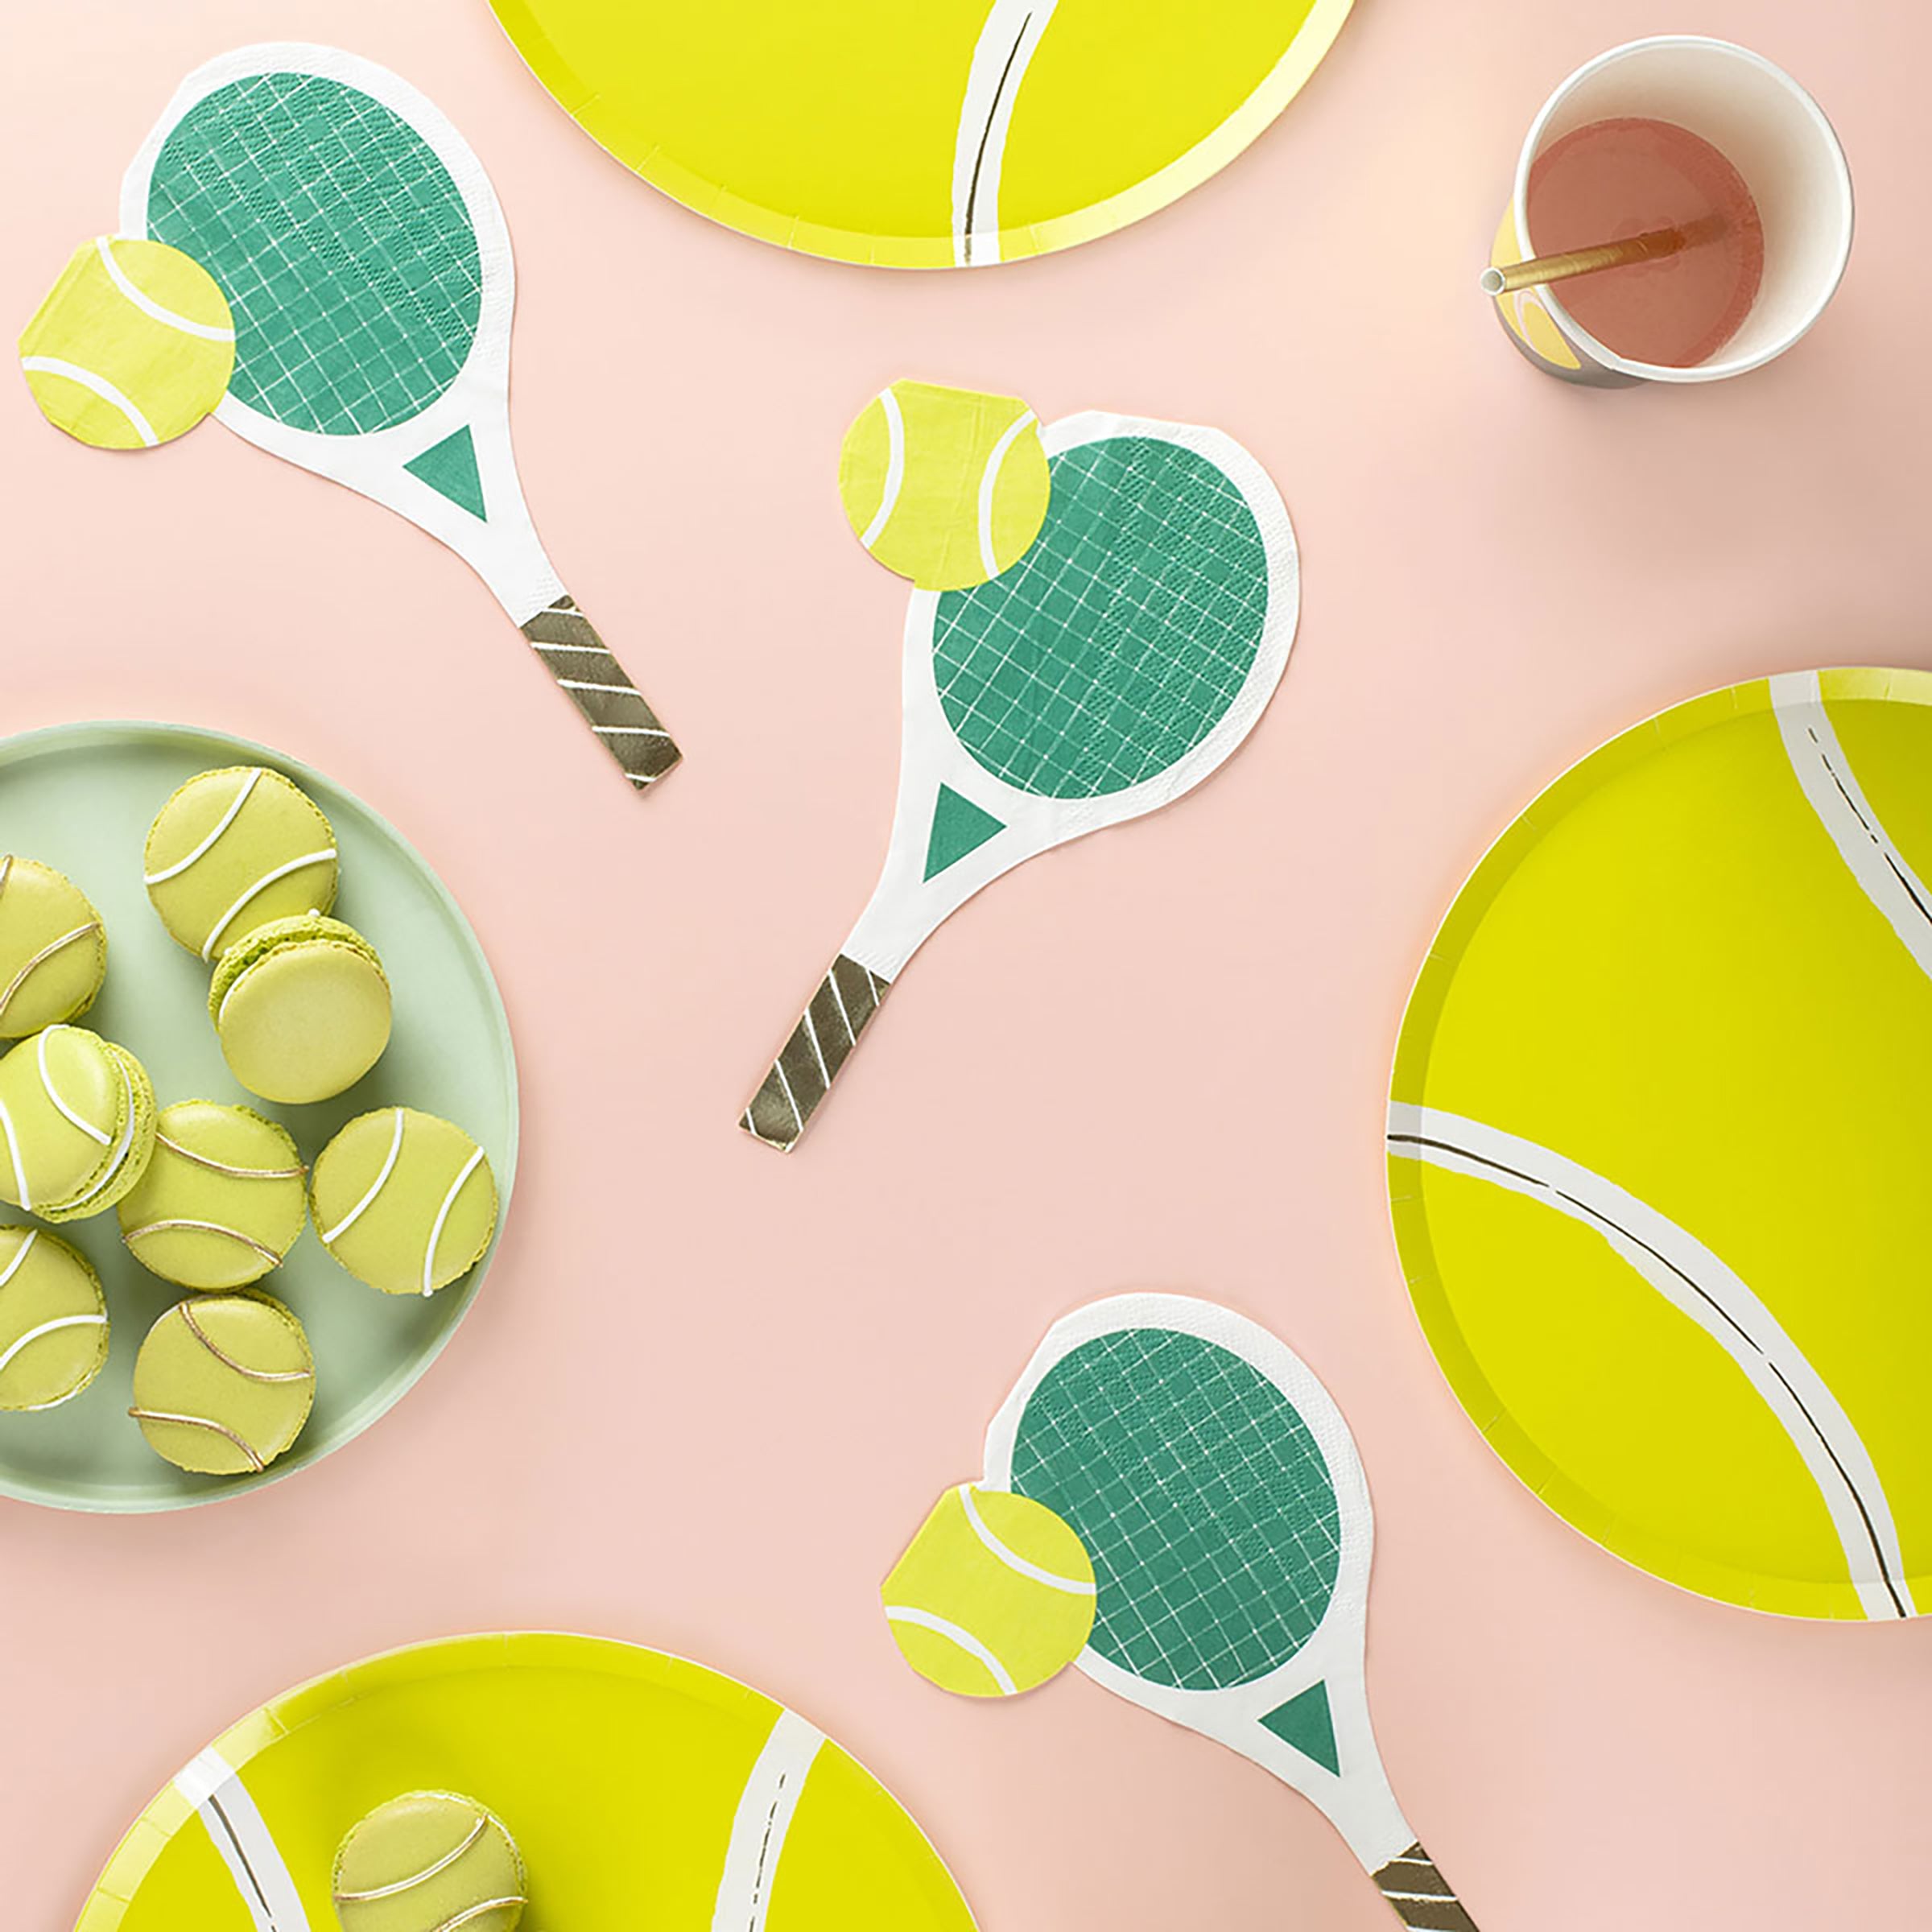 Our fun party napkins, in the shape of a tennis racket and tennis ball, are perfect for a tennis party.